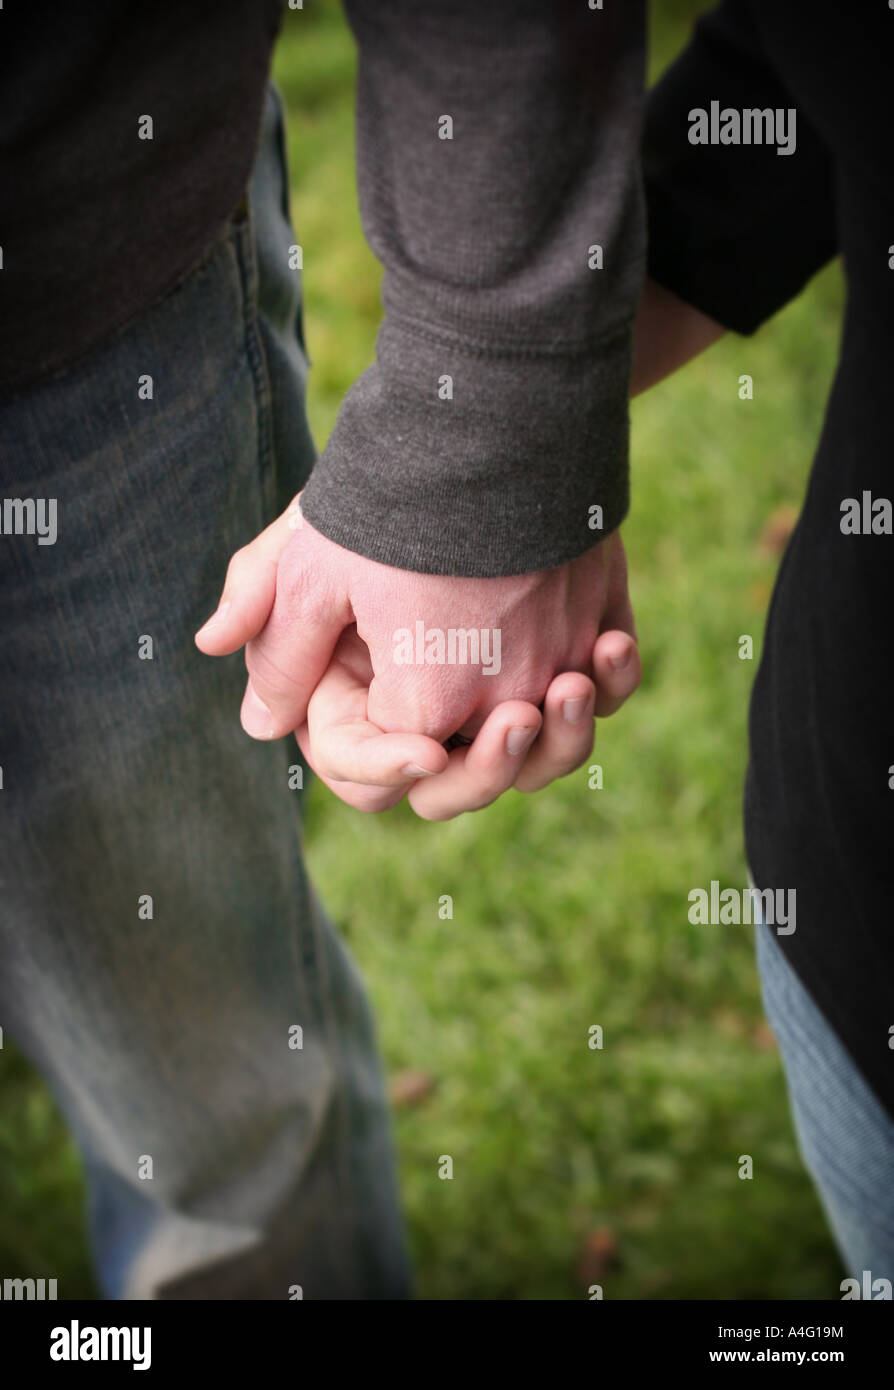 Couple holding hands wearing jeans in the green grass Stock Photo - Alamy